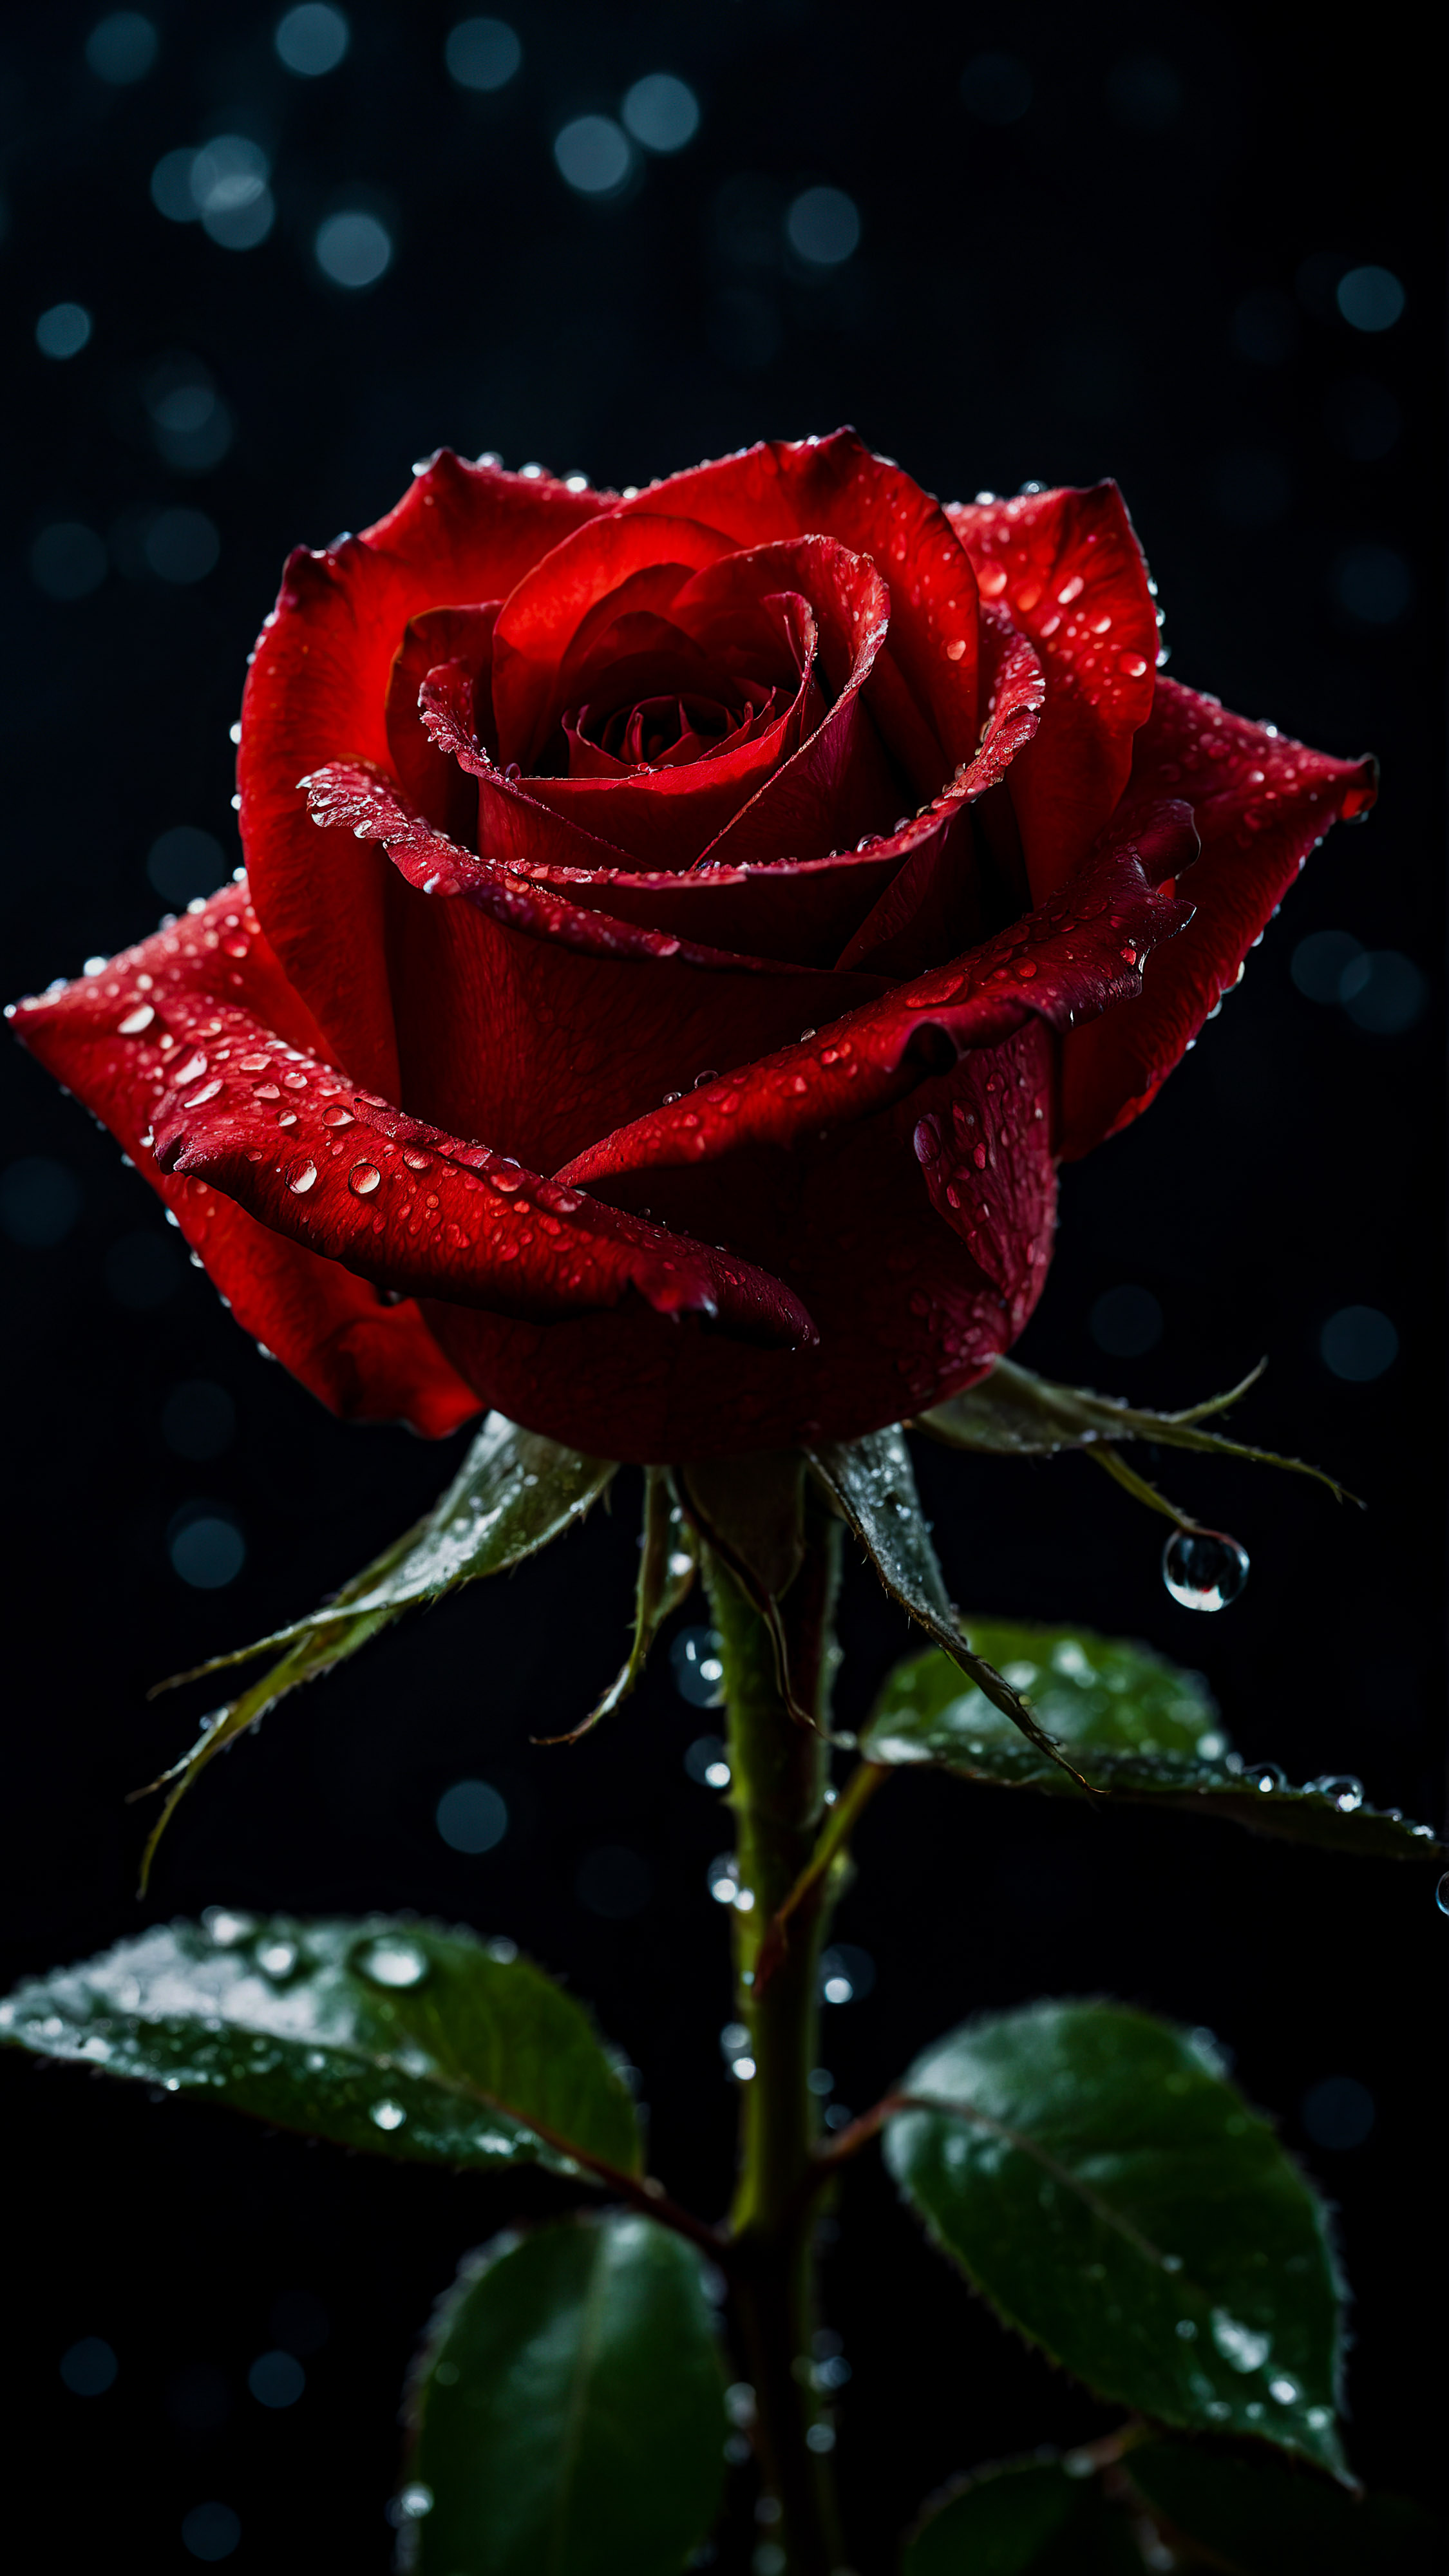 Admire the elegance of our iPhone beautiful wallpaper, featuring a radiant red rose with dew drops on its petals, set in a dark, dramatic setting with vertical lights filtering through in the background.